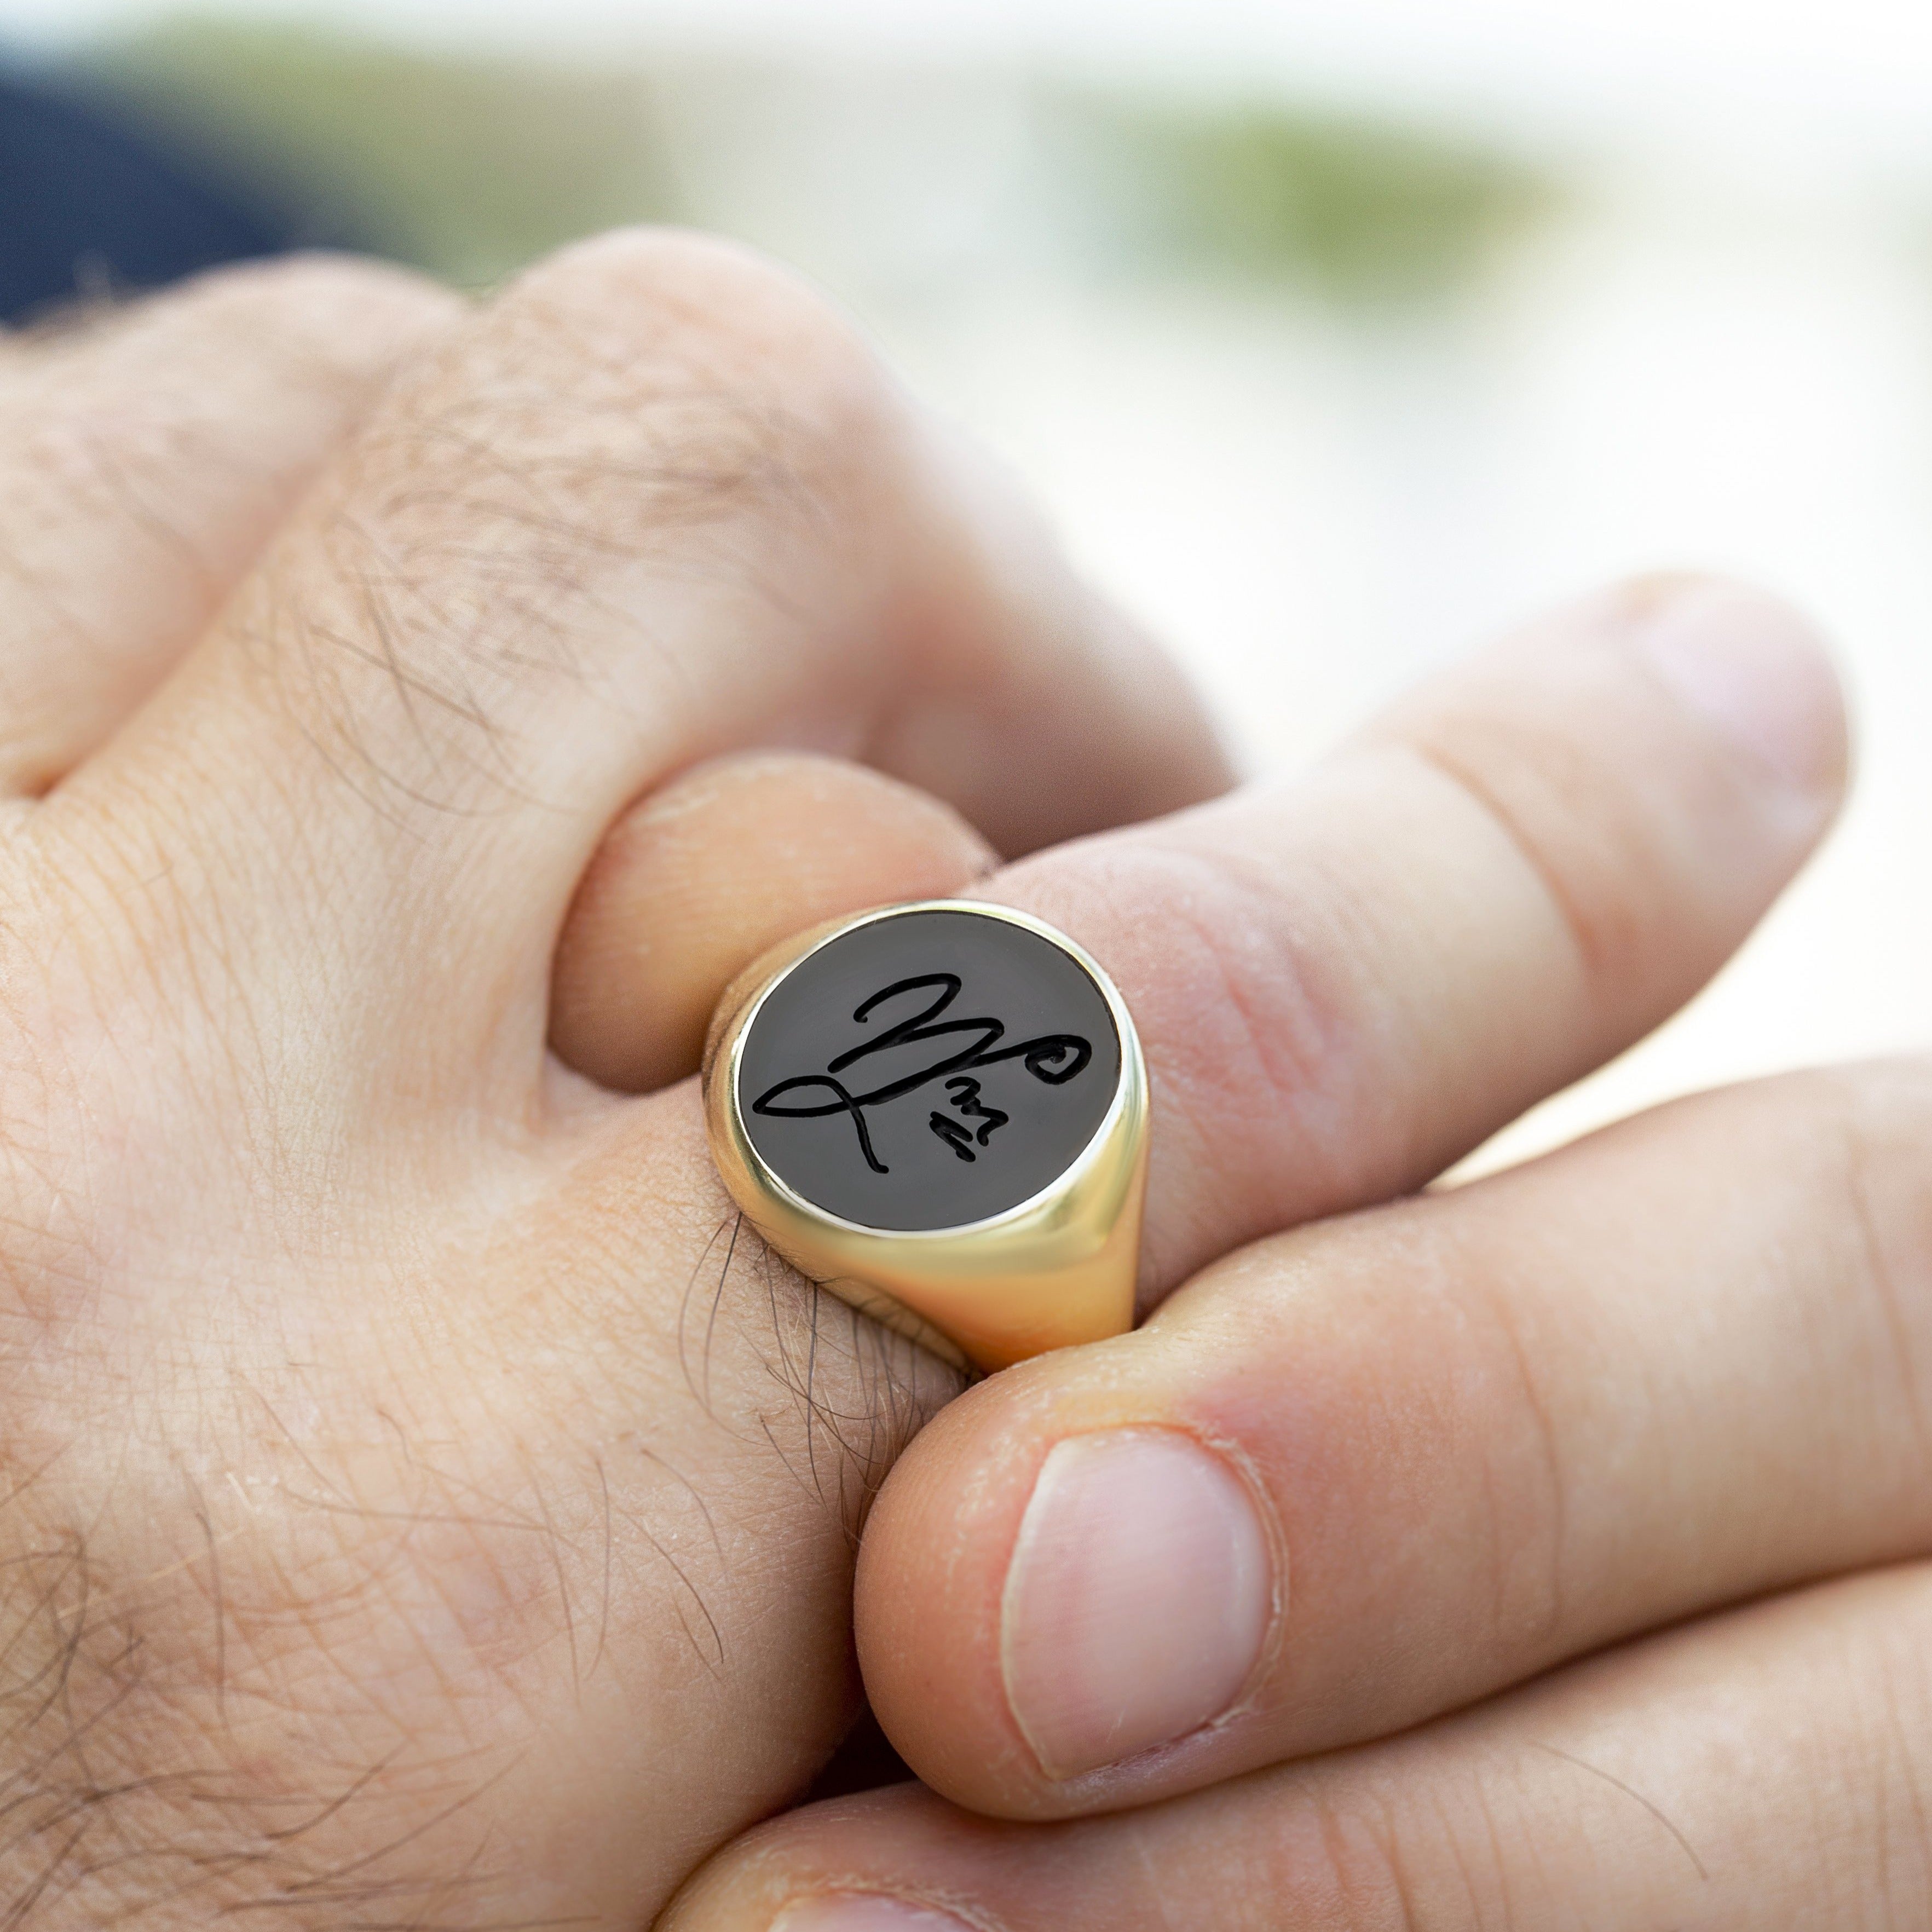 Black Onyx Coat Of Arms Gold Signet Ring For Men - Danelian Jewelry